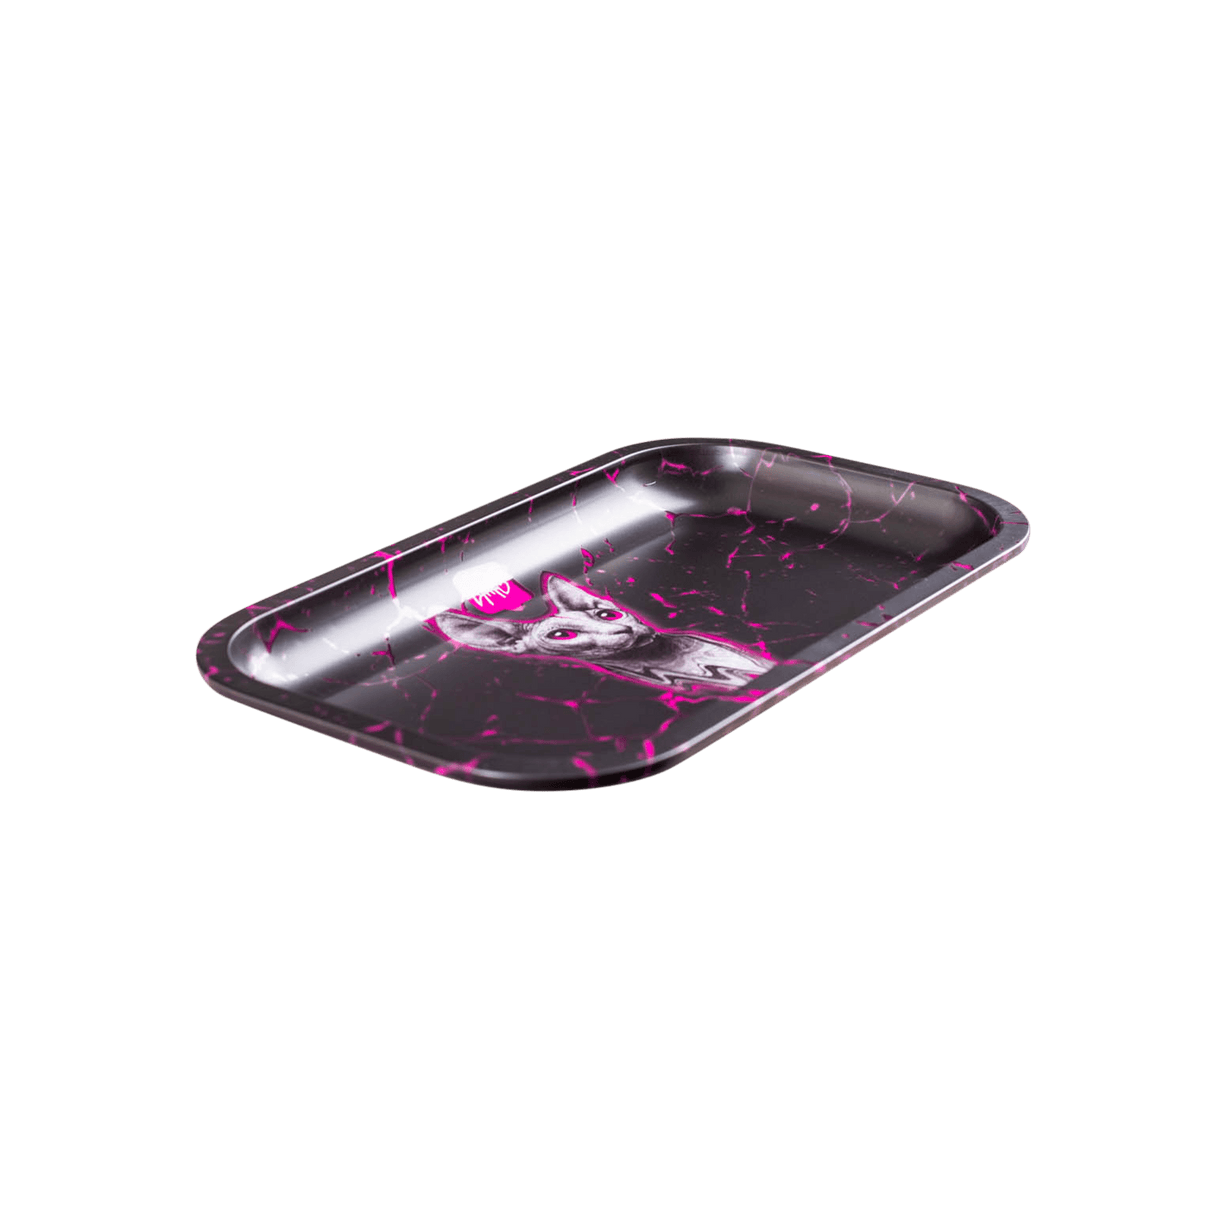 V Syndicate Stray Metal Rollin' Tray in black with pink accents, compact and portable design